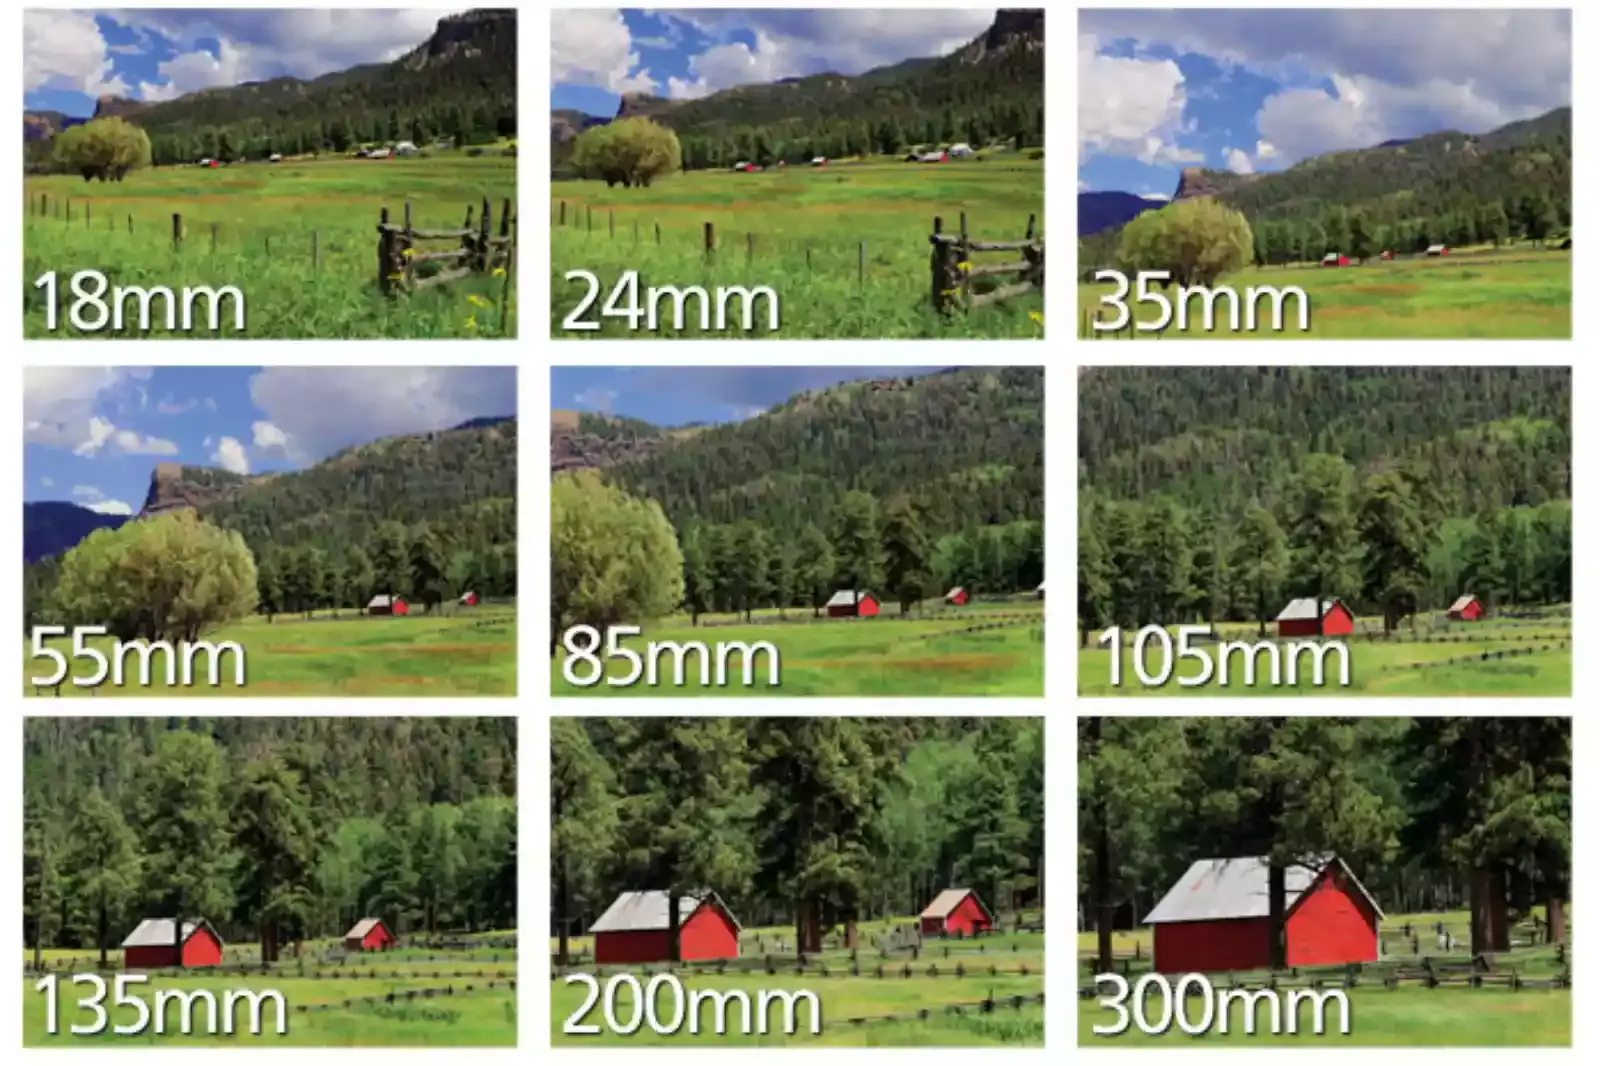 What is Focal Length